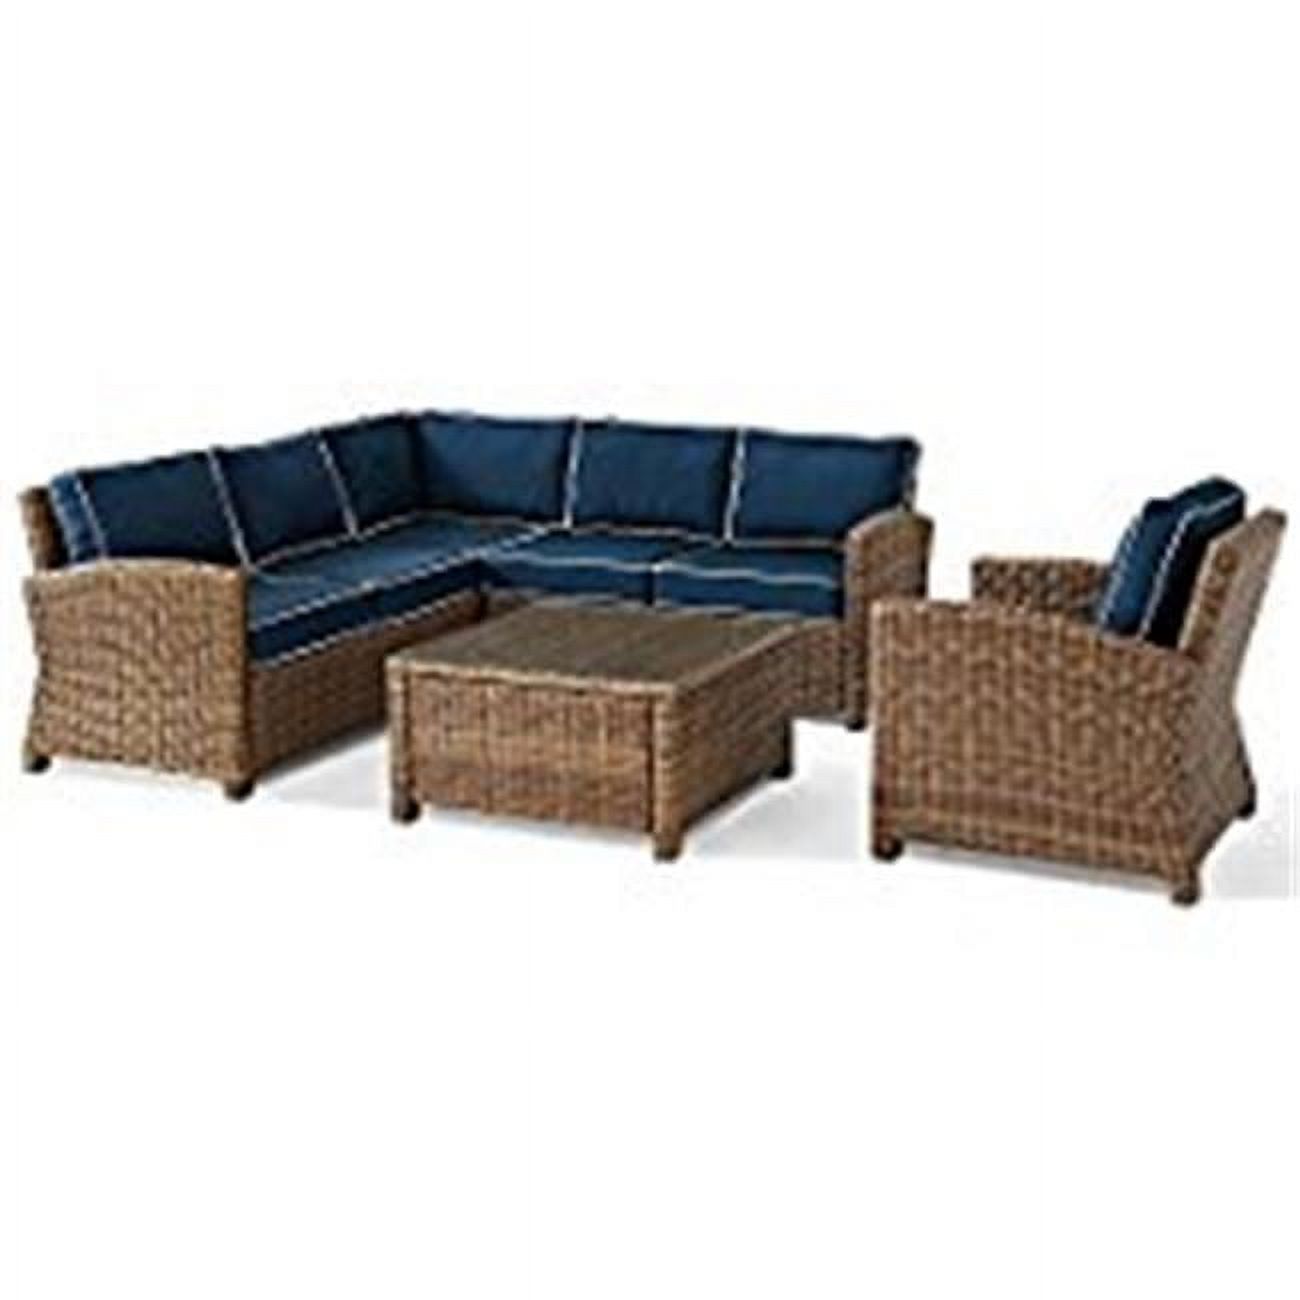 Crosley Furniture Bradenton 5 Pc Fabric Patio Sectional Set in Brown and Navy - image 1 of 10